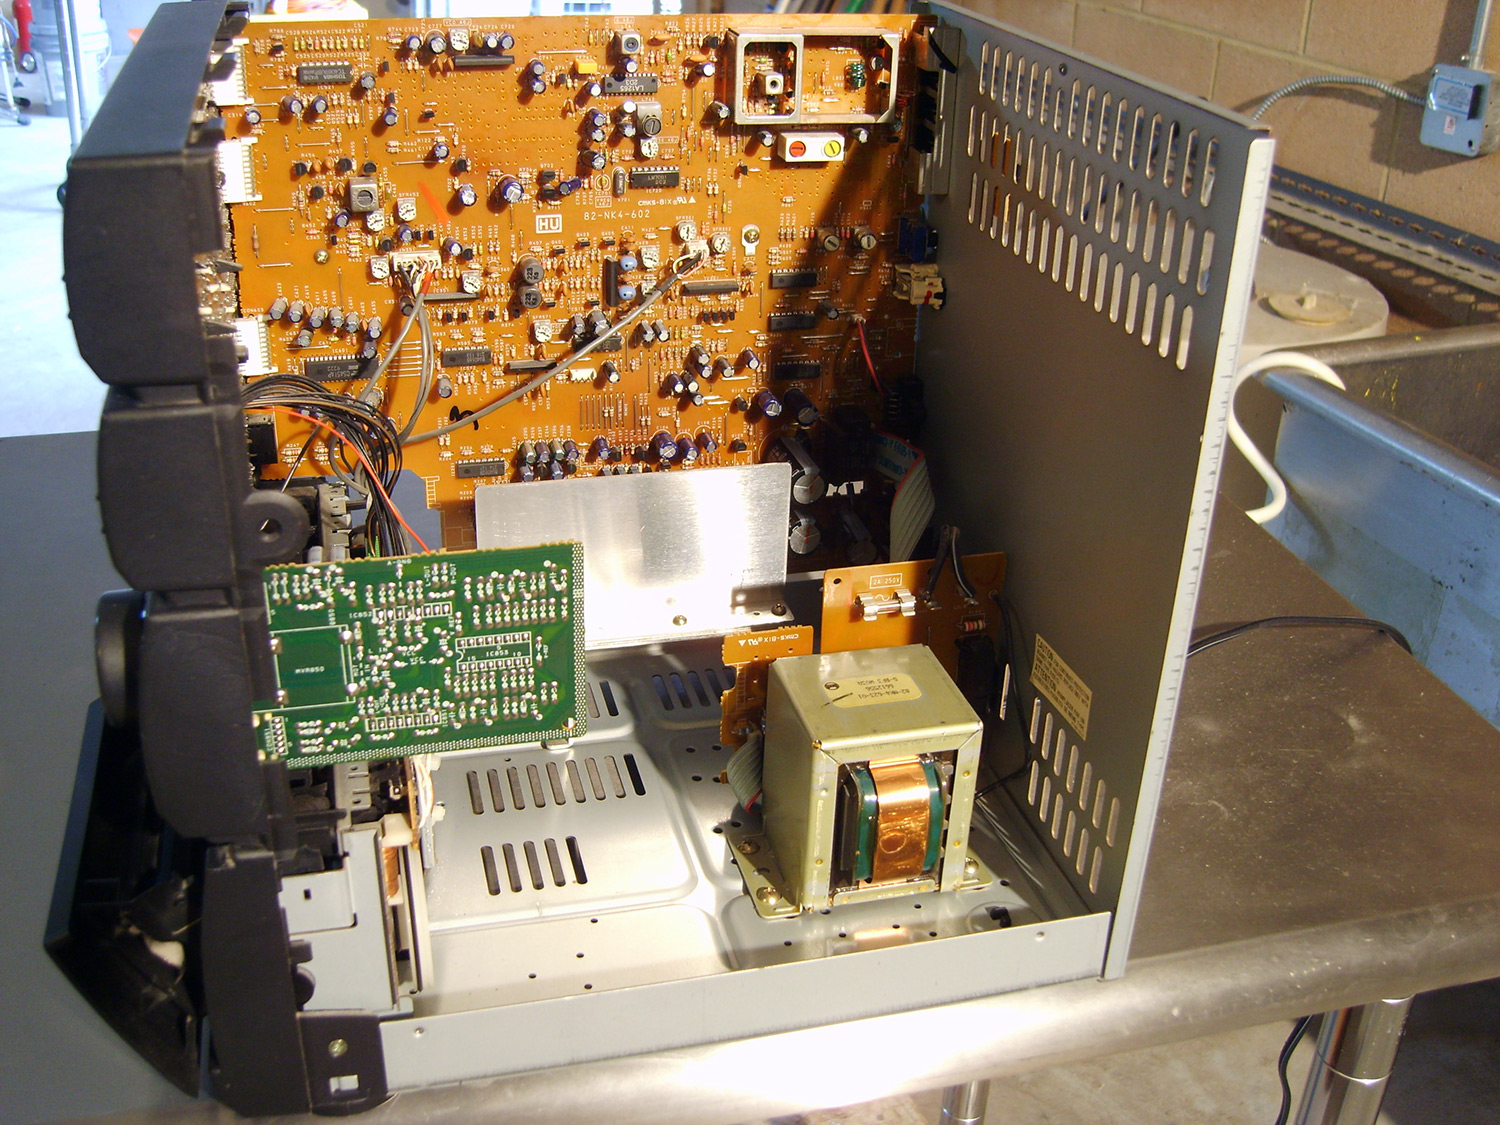 Open computer tower with exposed interior components cleaned by TERS, Inc.